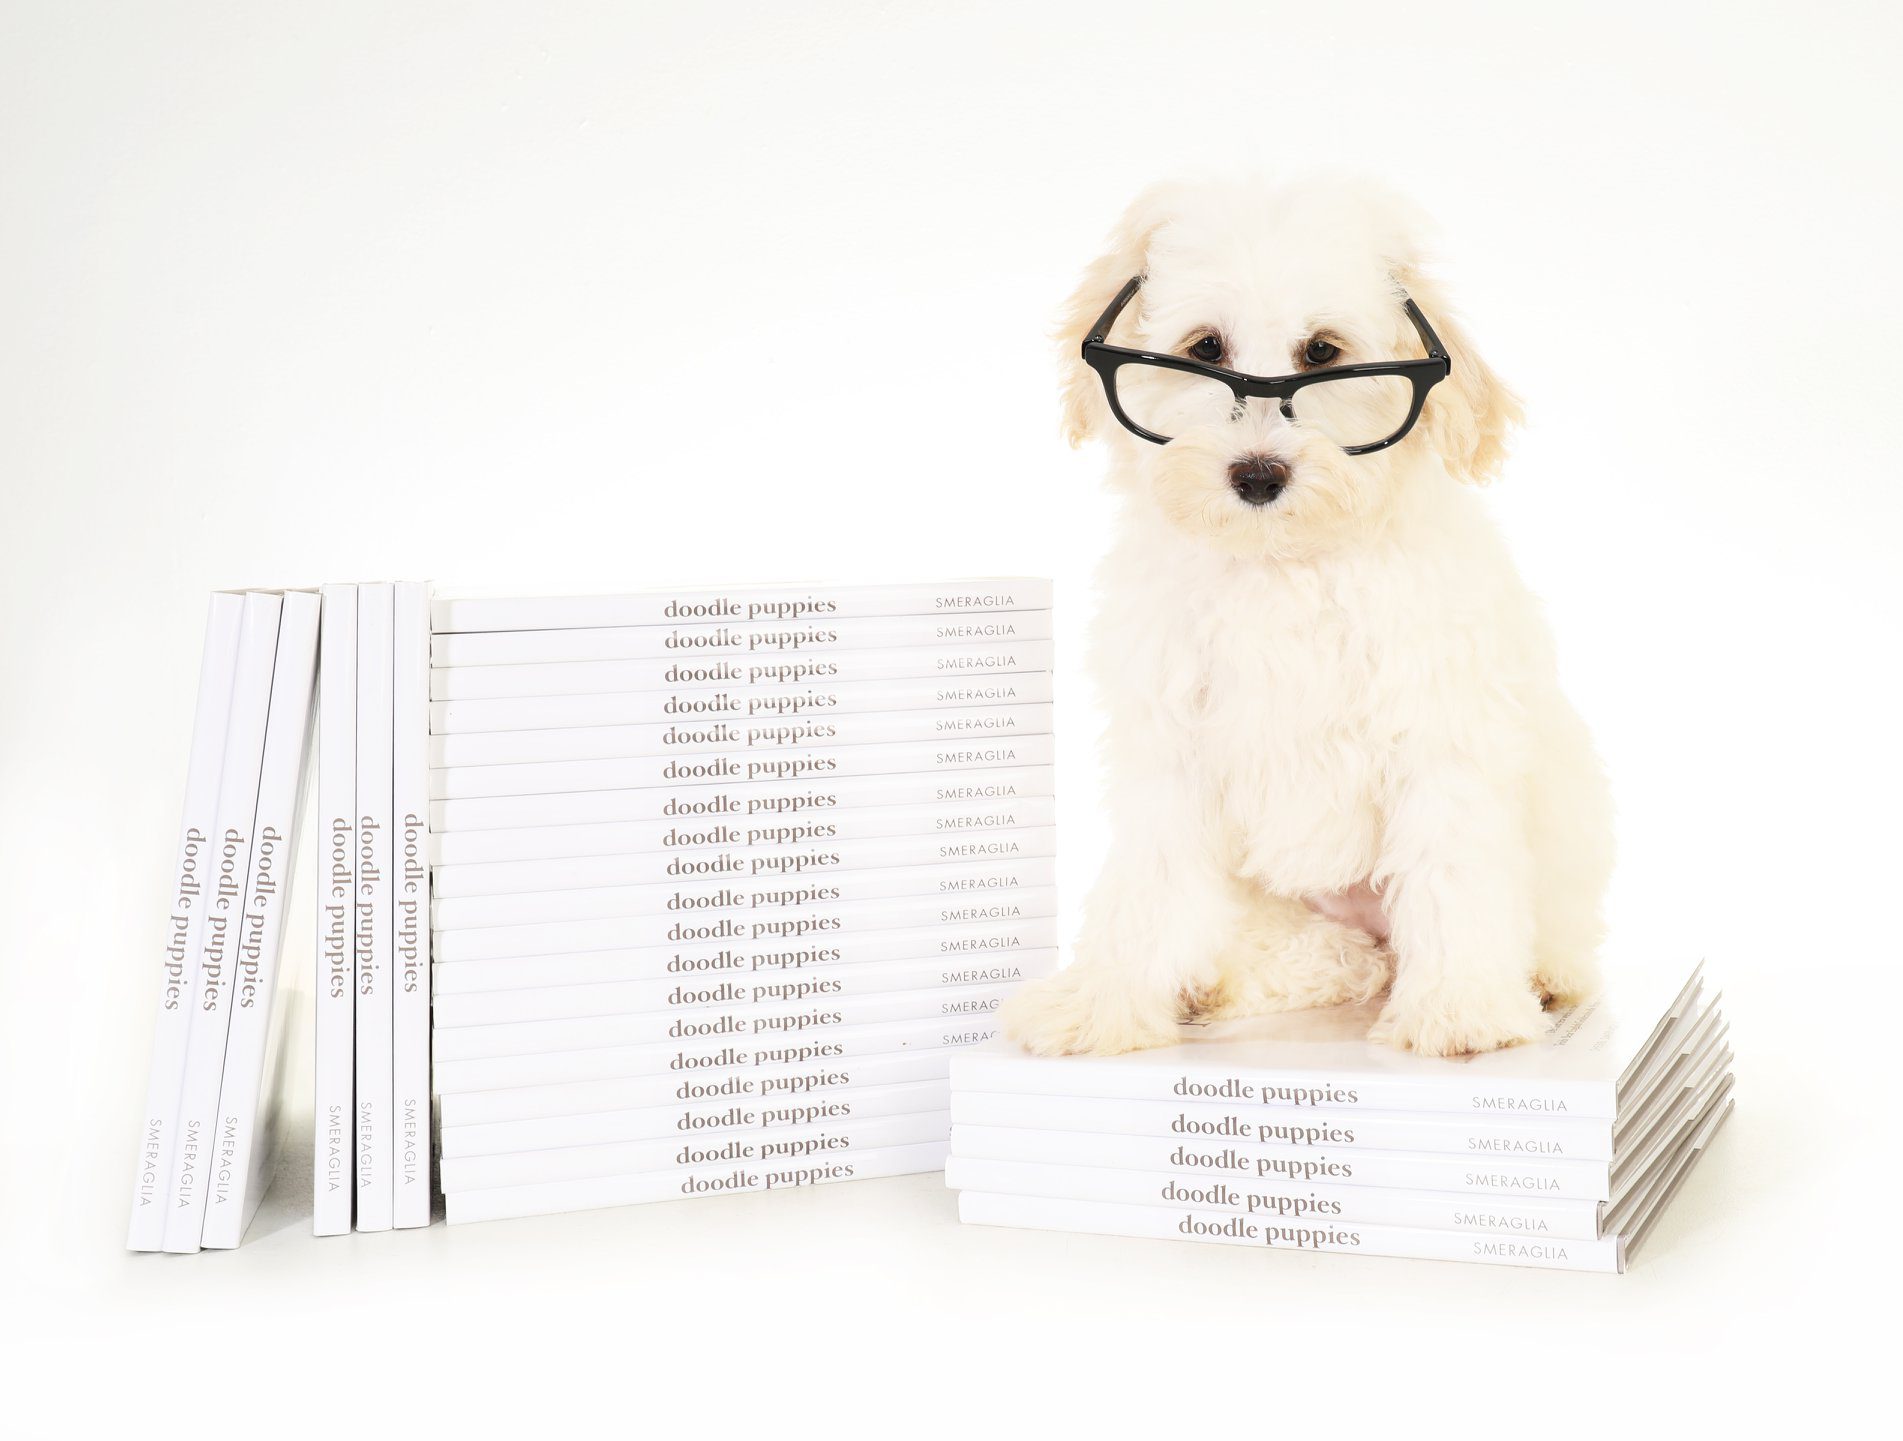 a cream goldendoodle with glasses on sitting on a stack of goldendoodle books